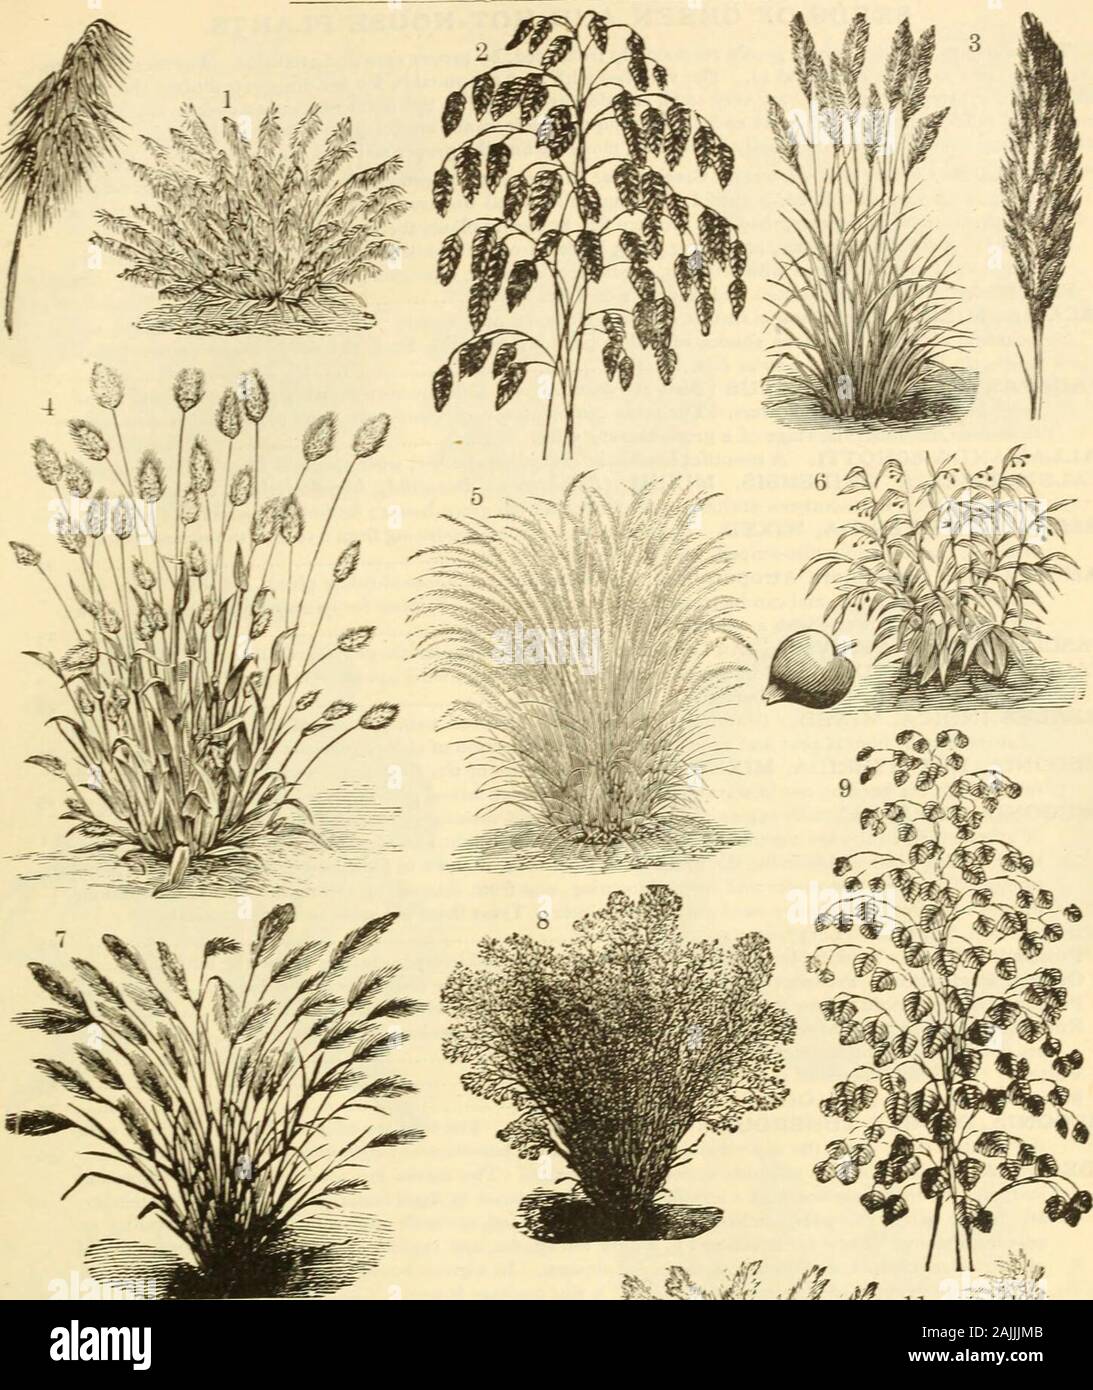 Dreer's garden calendar : 1884 . ^ feet 5 PHALARIS ARUNDINACEA. A beautiful variety of striped Ribbon Grass ; hardy perennial; 3 feet 5 SETARIA MACROCHETA. An elegant plant, with graceful, drooping plumes ; hardy annual; 2 feet 5 STIPA {Feather Grass). A hardy perennial plant, with beautiful, delicate, white, feathery bloom ; in greatdemand for ornamental work and florists use, flowering the second season from seed. The seed beingslow to vegetate, it should be started in a hot-bed; 2 feet.Pennata. One of the most graceful of all grasses, producing very delicate, feathery-like stems of bloom, i Stock Photo